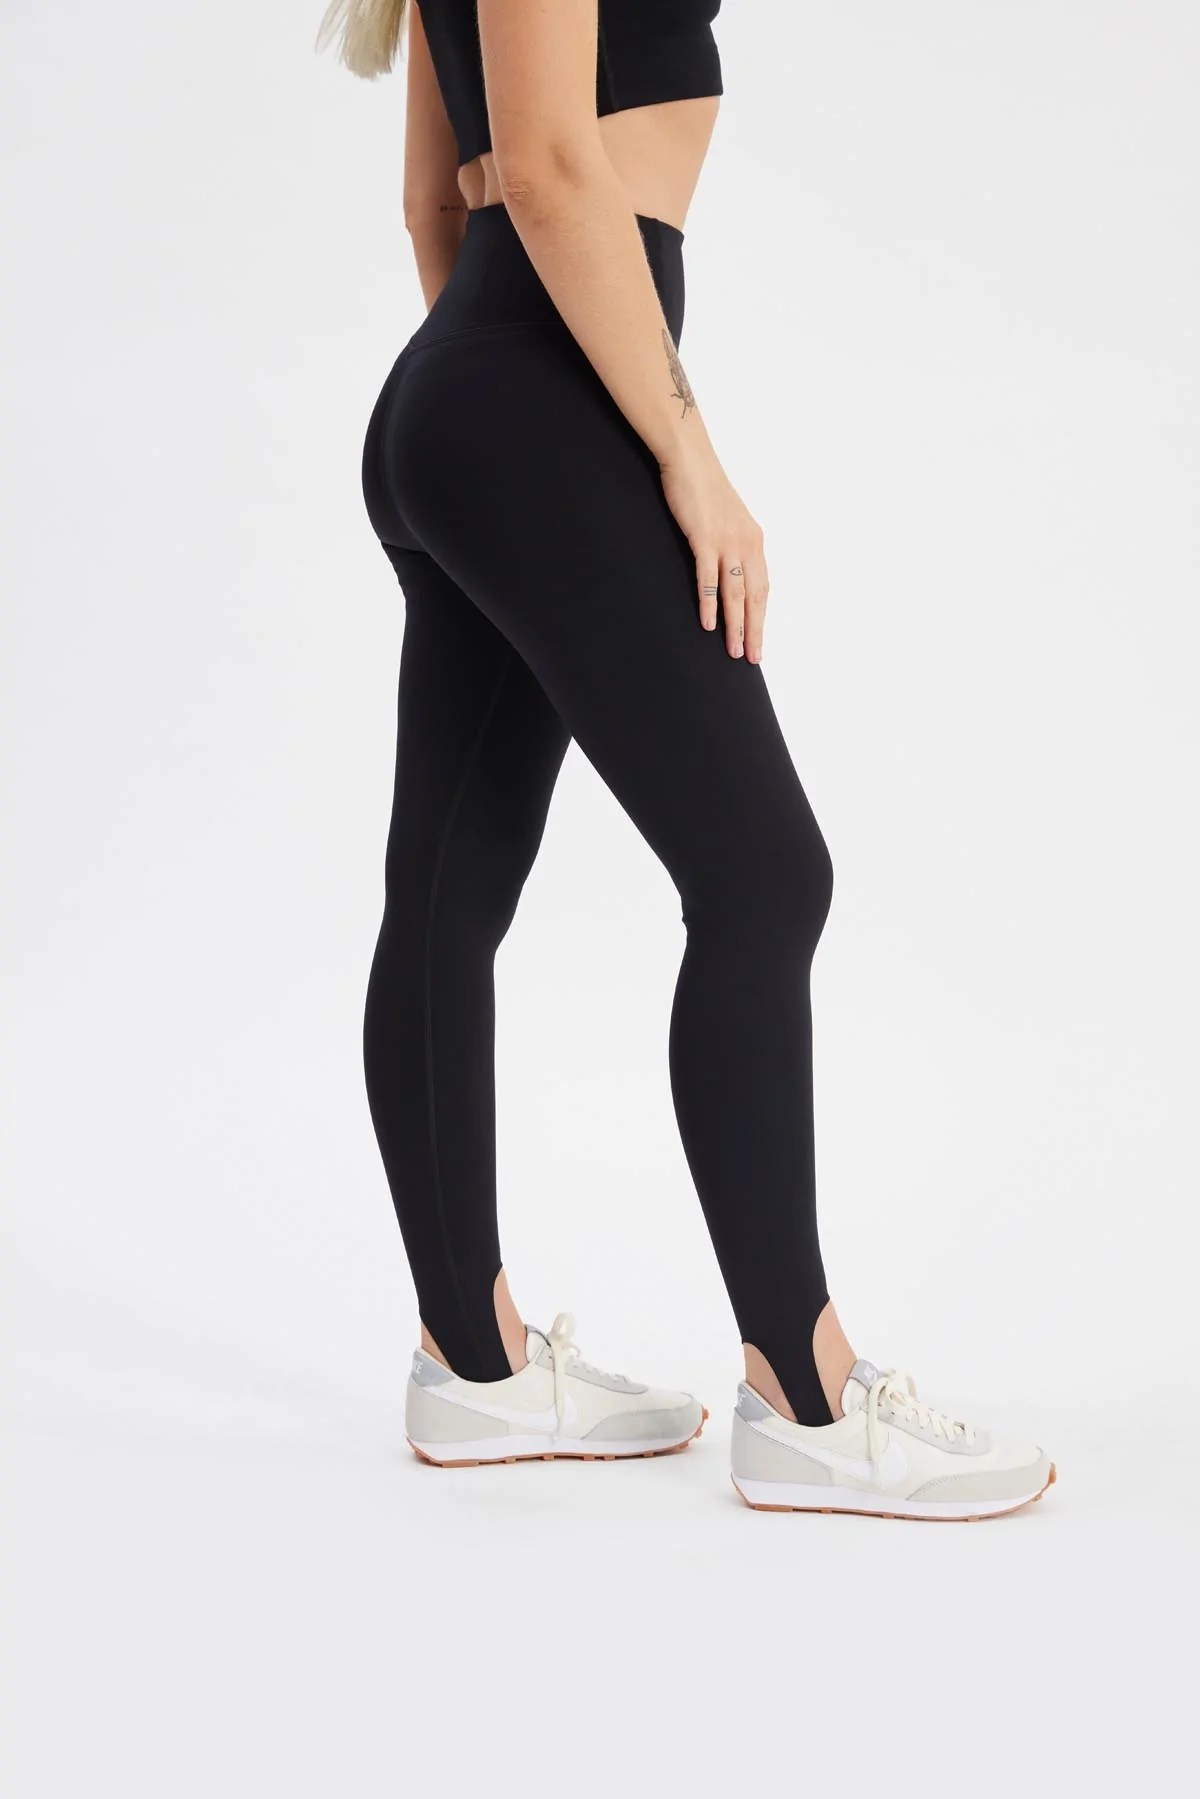 10 Stirrup Leggings That Actually Stay In Place